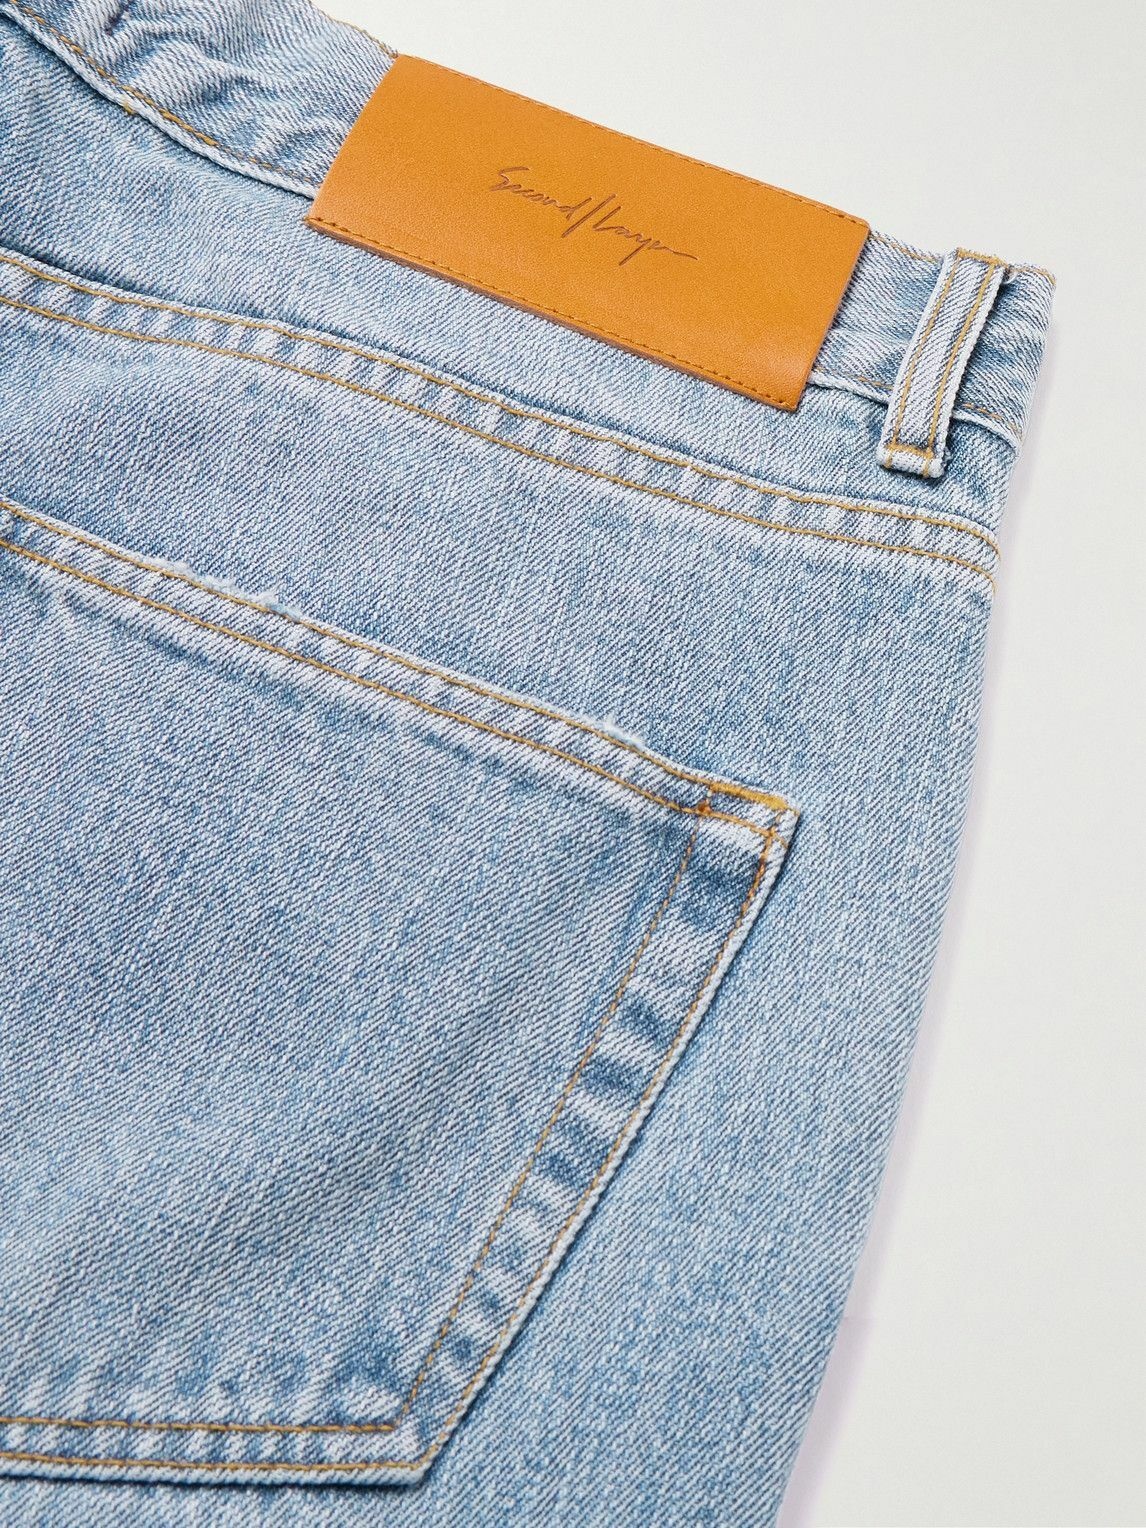 SECOND / LAYER - Flaco Straight-Leg Distressed Jeans - Blue Second/Layer